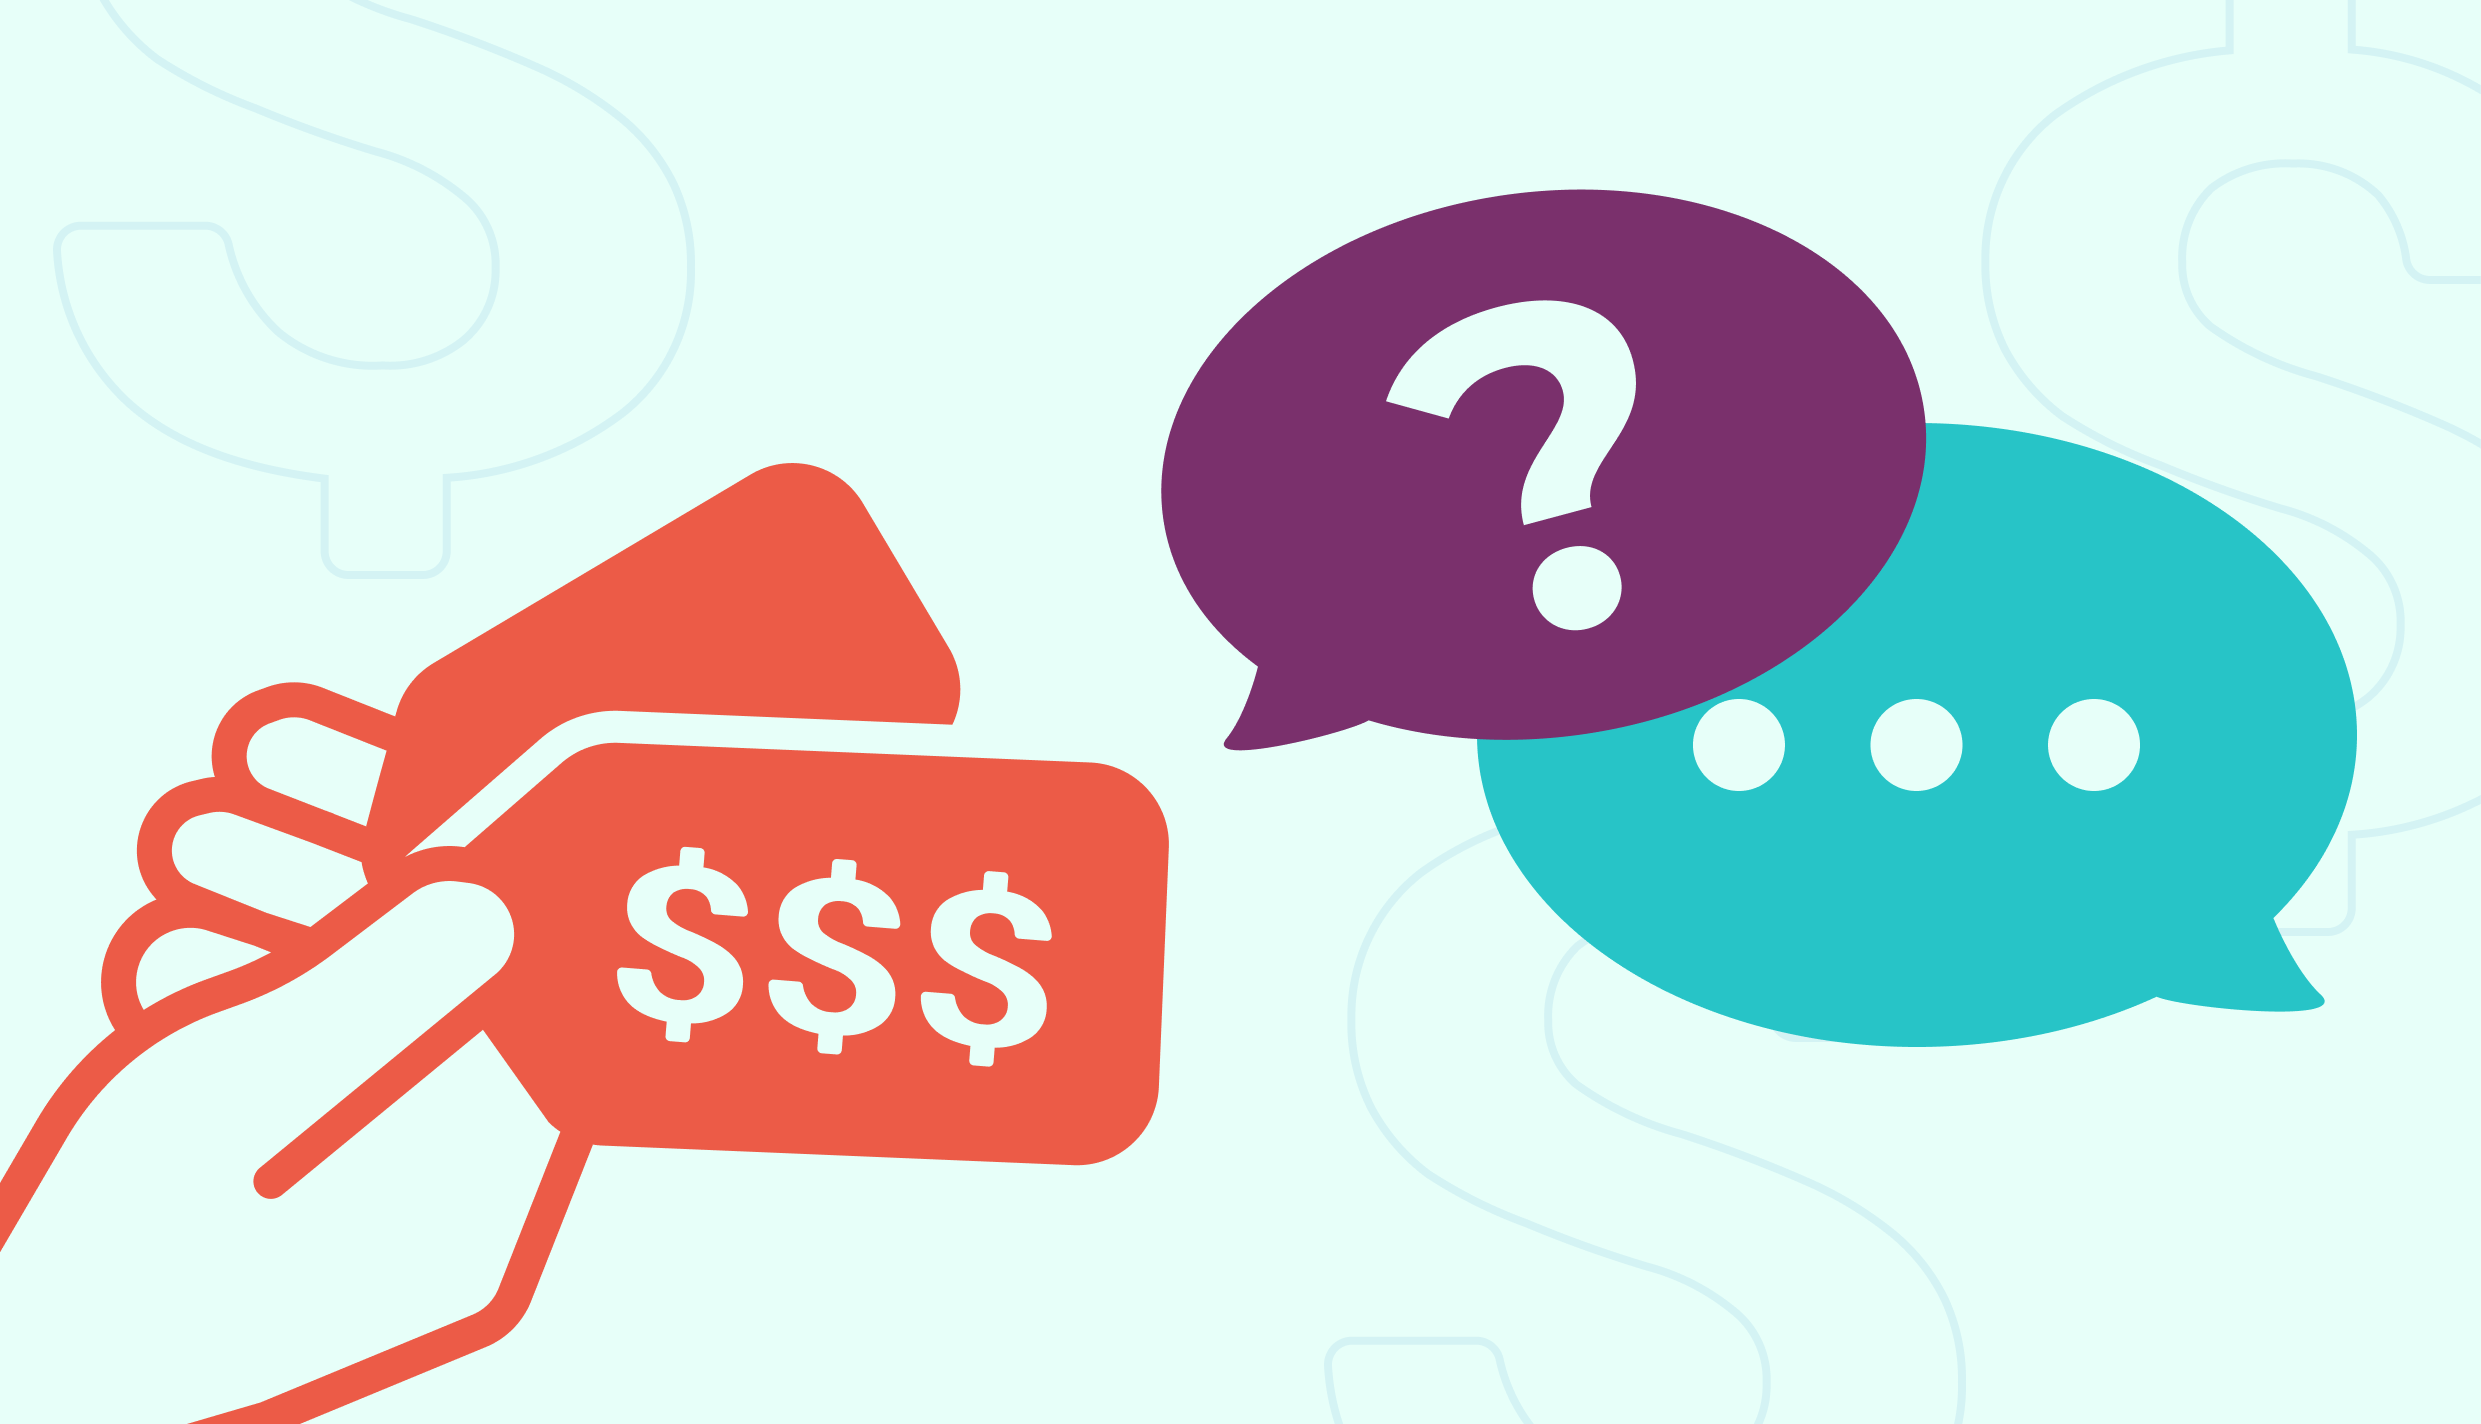 How to_ Explaining sticker shock & negotiating fees with clients